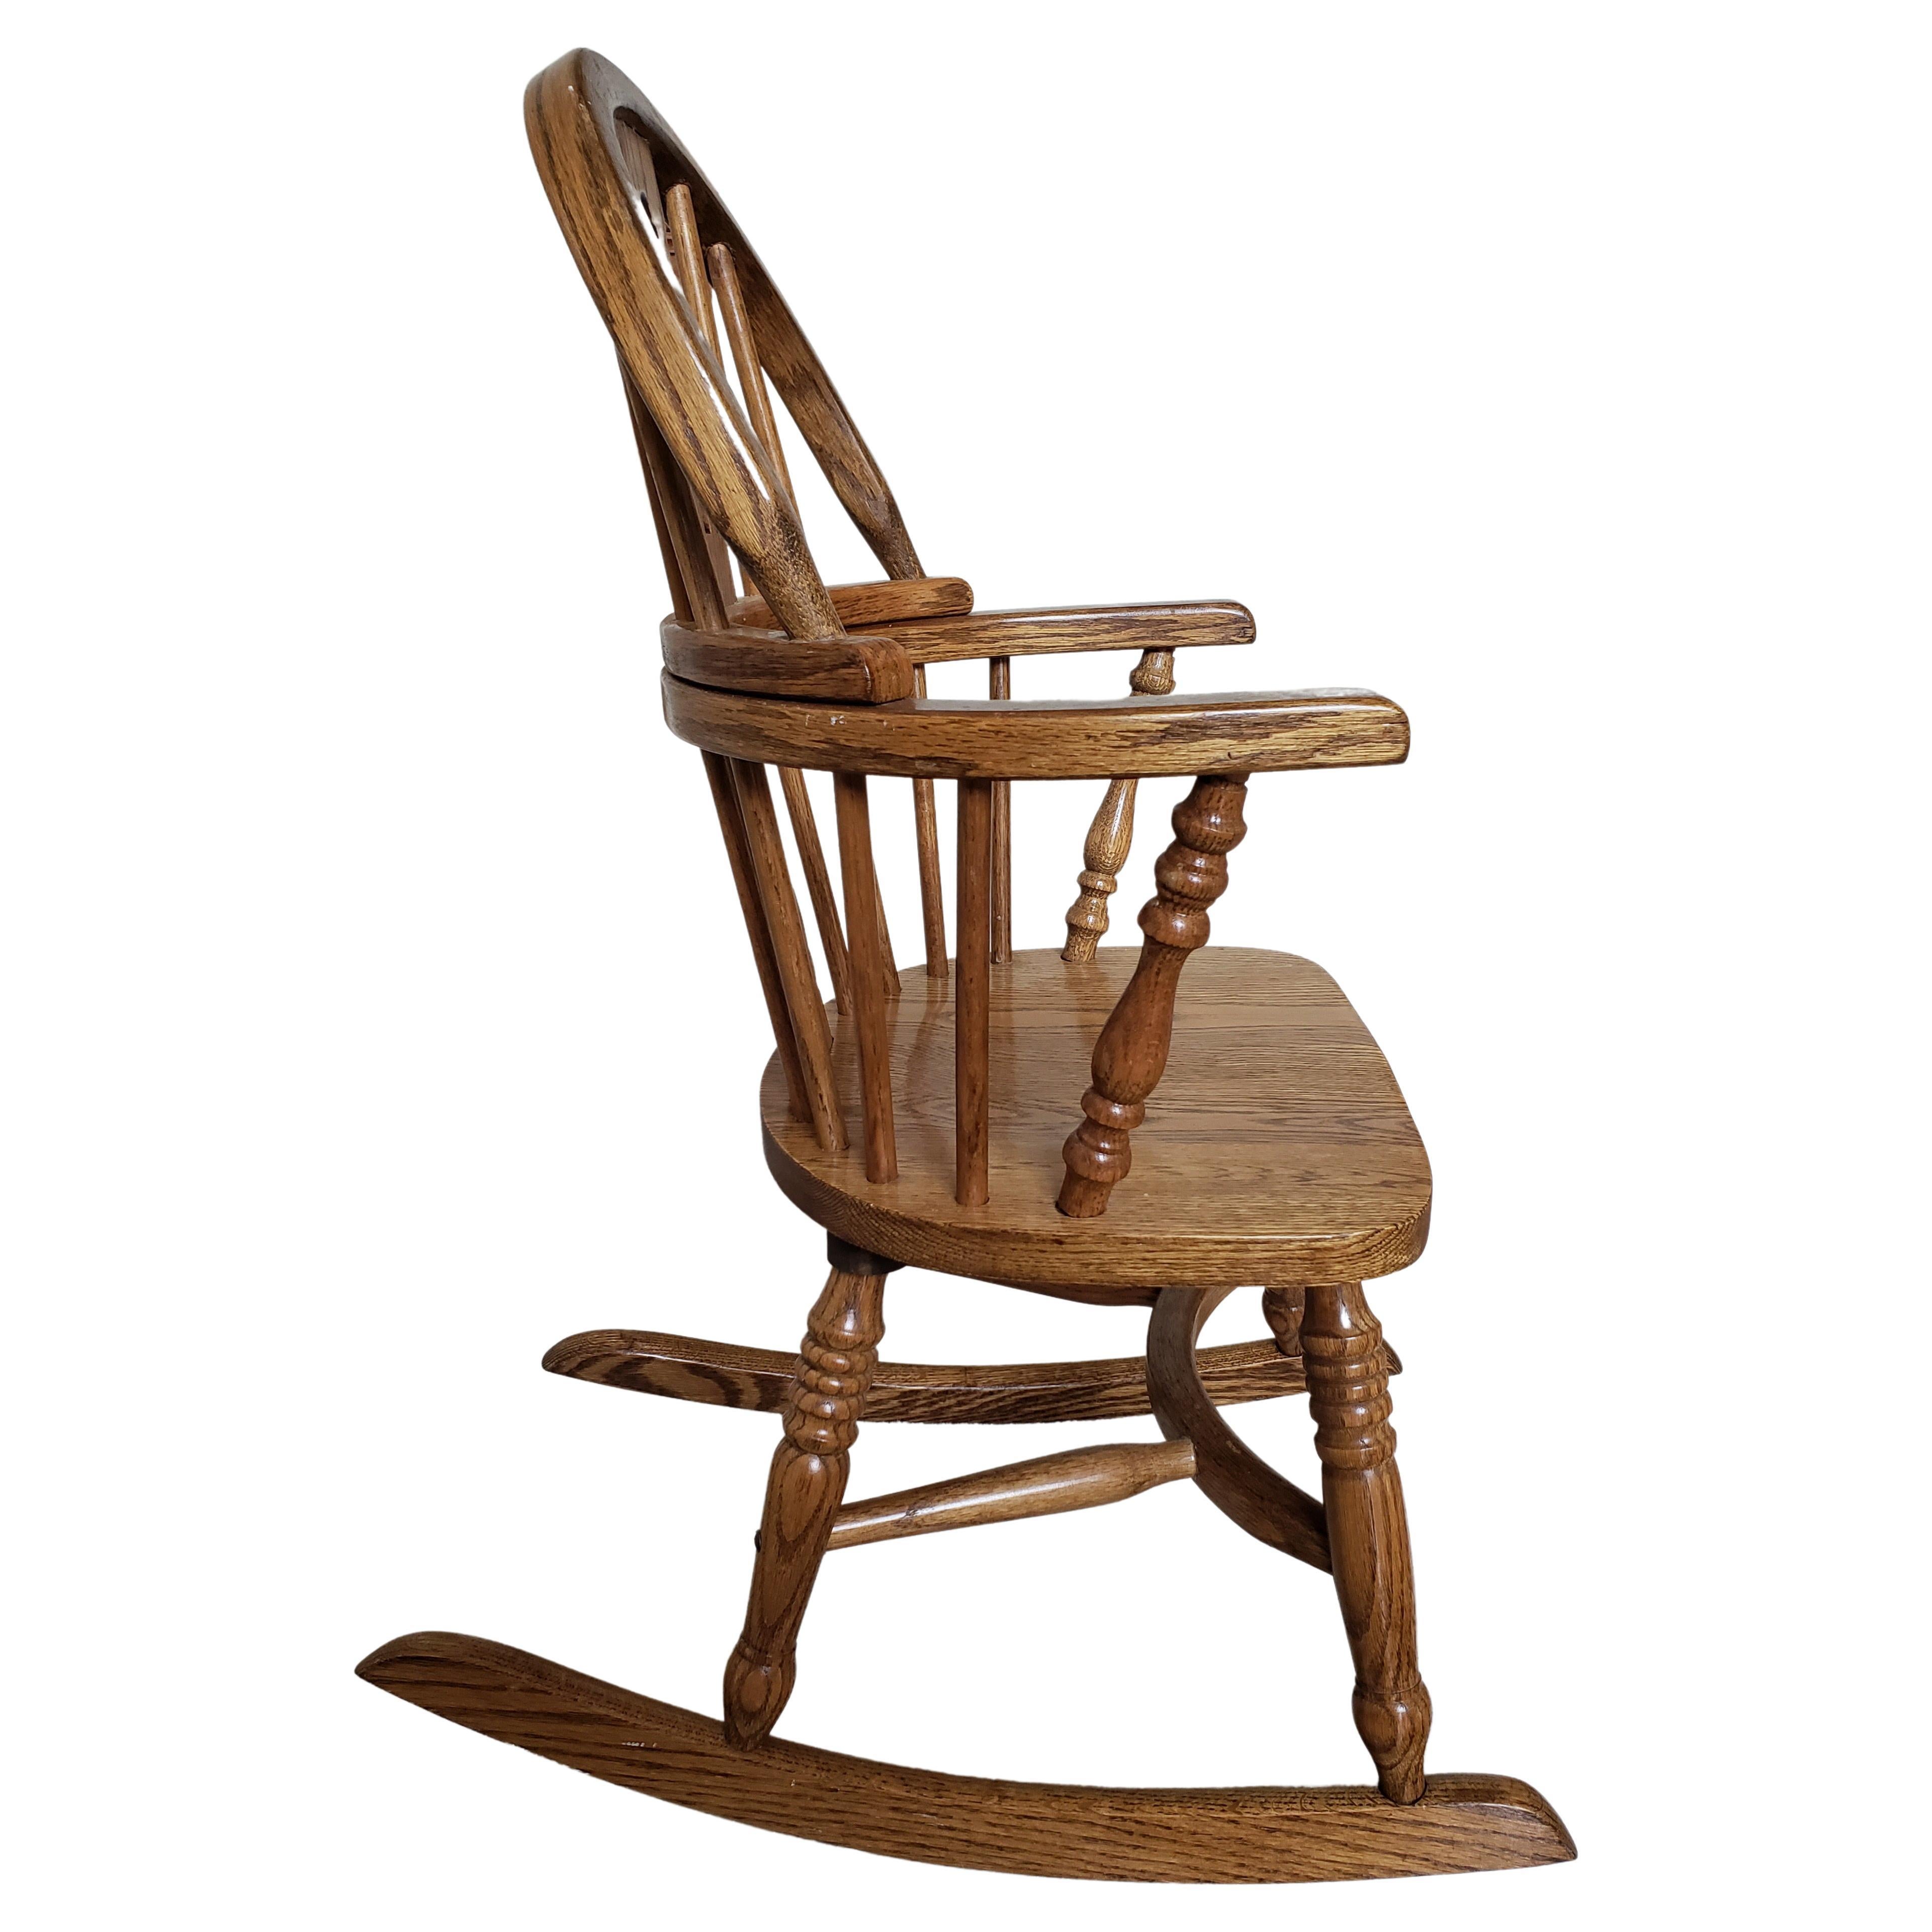 nichols and stone childs rocking chair